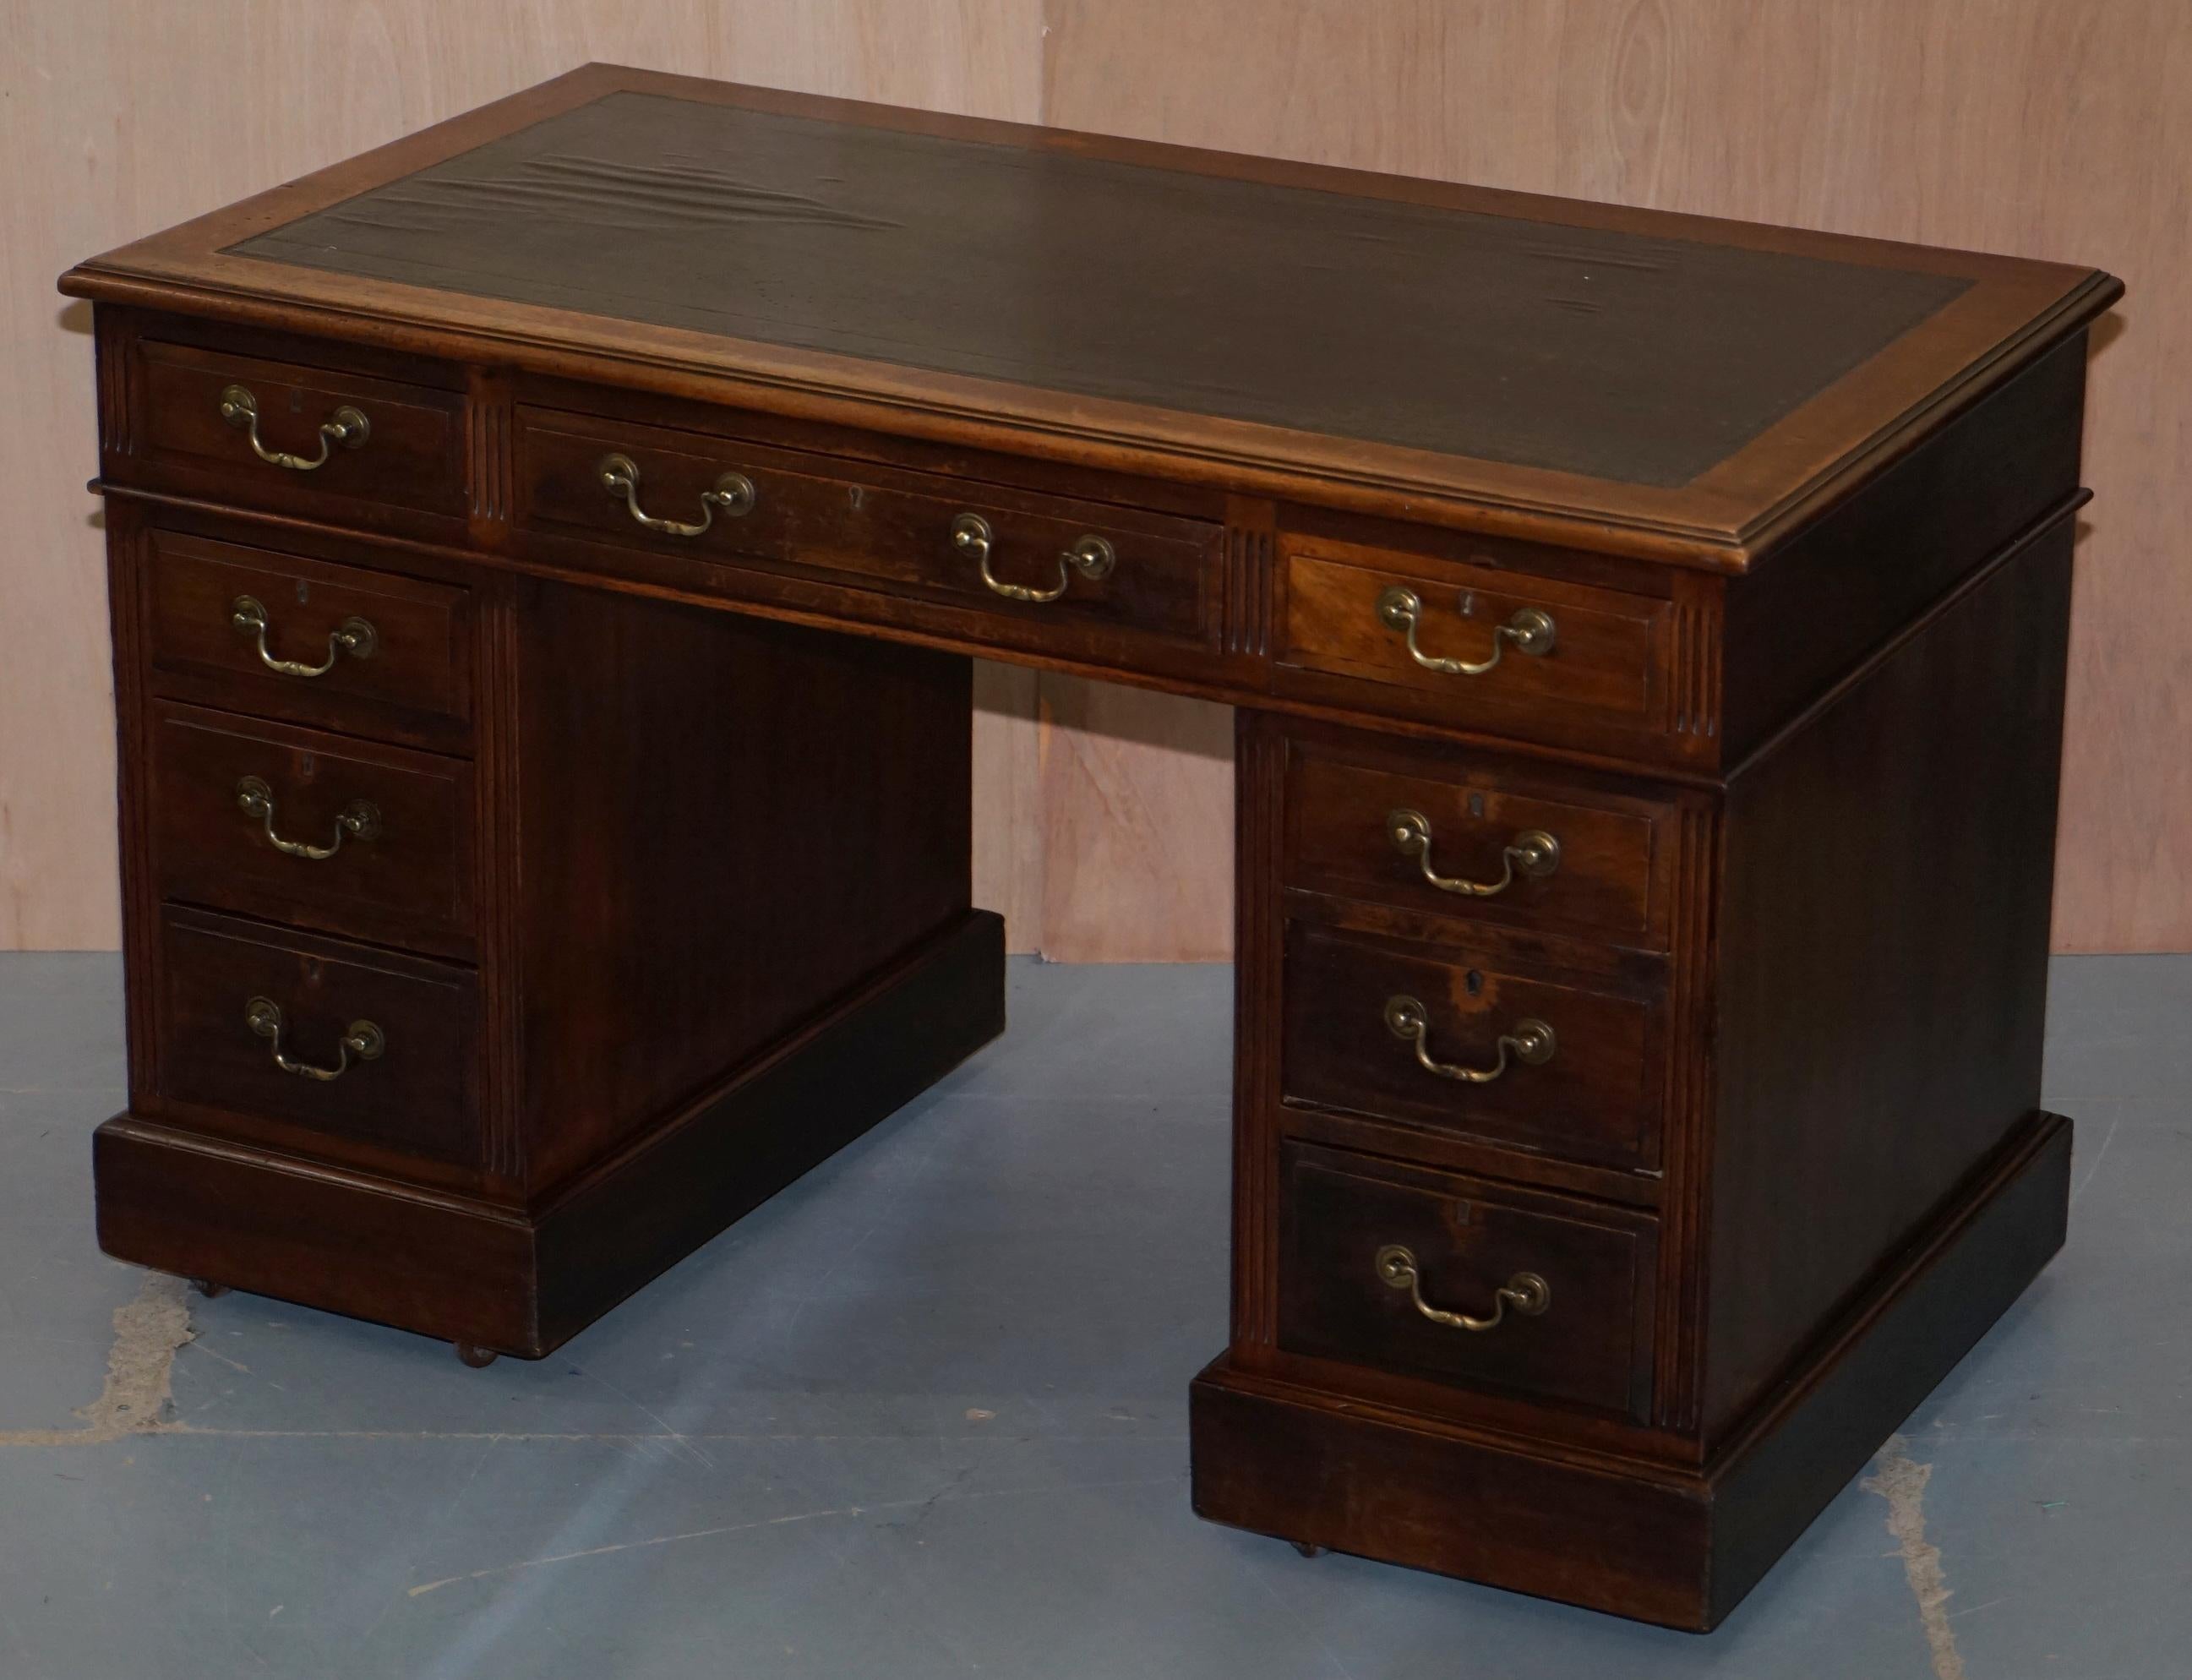 Hand-Crafted Lovely Victorian circa 1880 English Panelled Hardwood Twin Pedestal Partner Desk For Sale